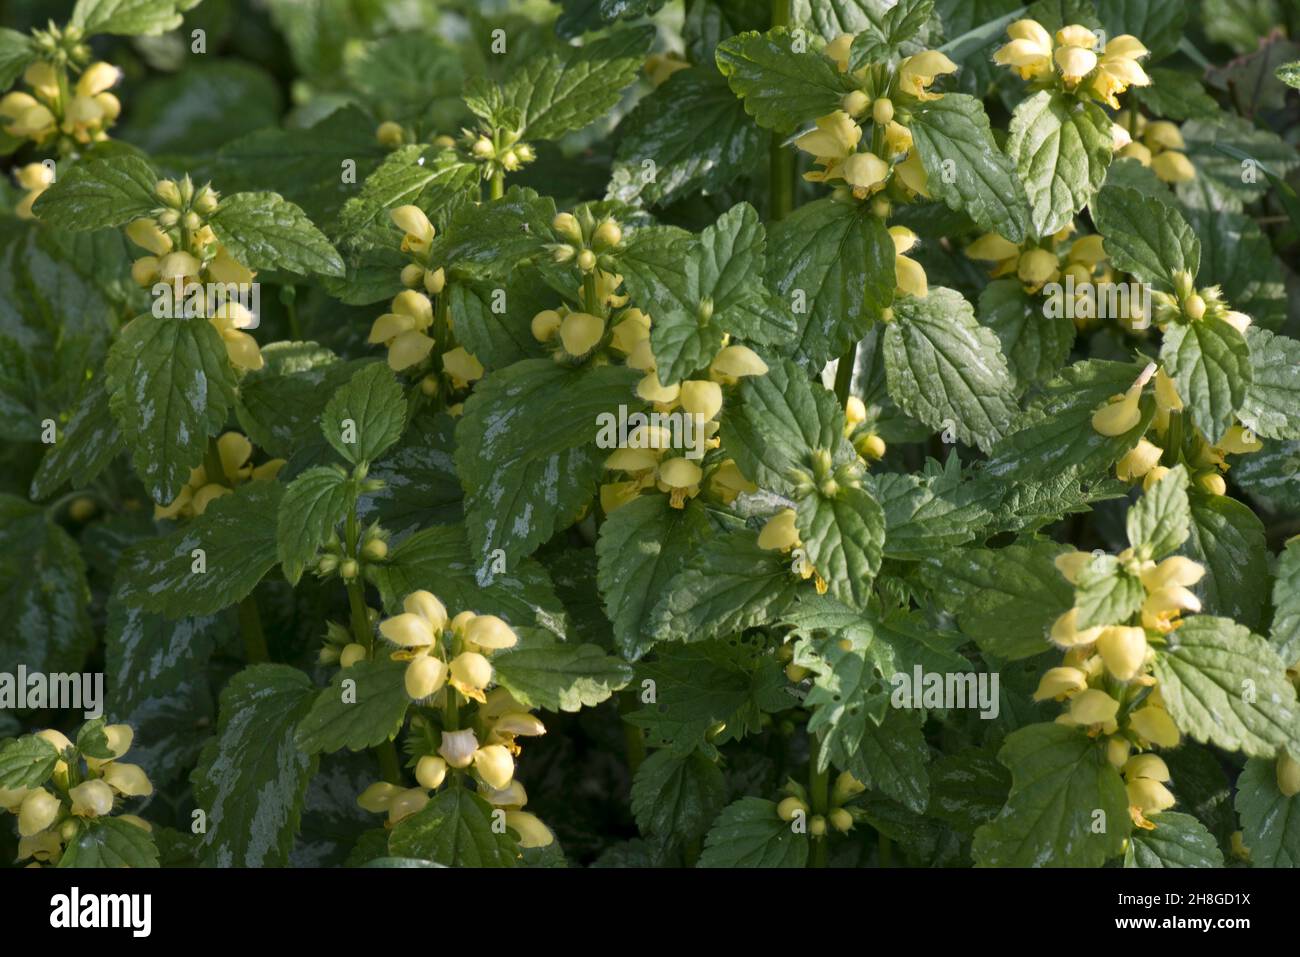 Yellow archangel (Lamium galeobdolon) flowering with slightly variegated leaves (X variegatum) a naturulised garden plant and weed, April Stock Photo